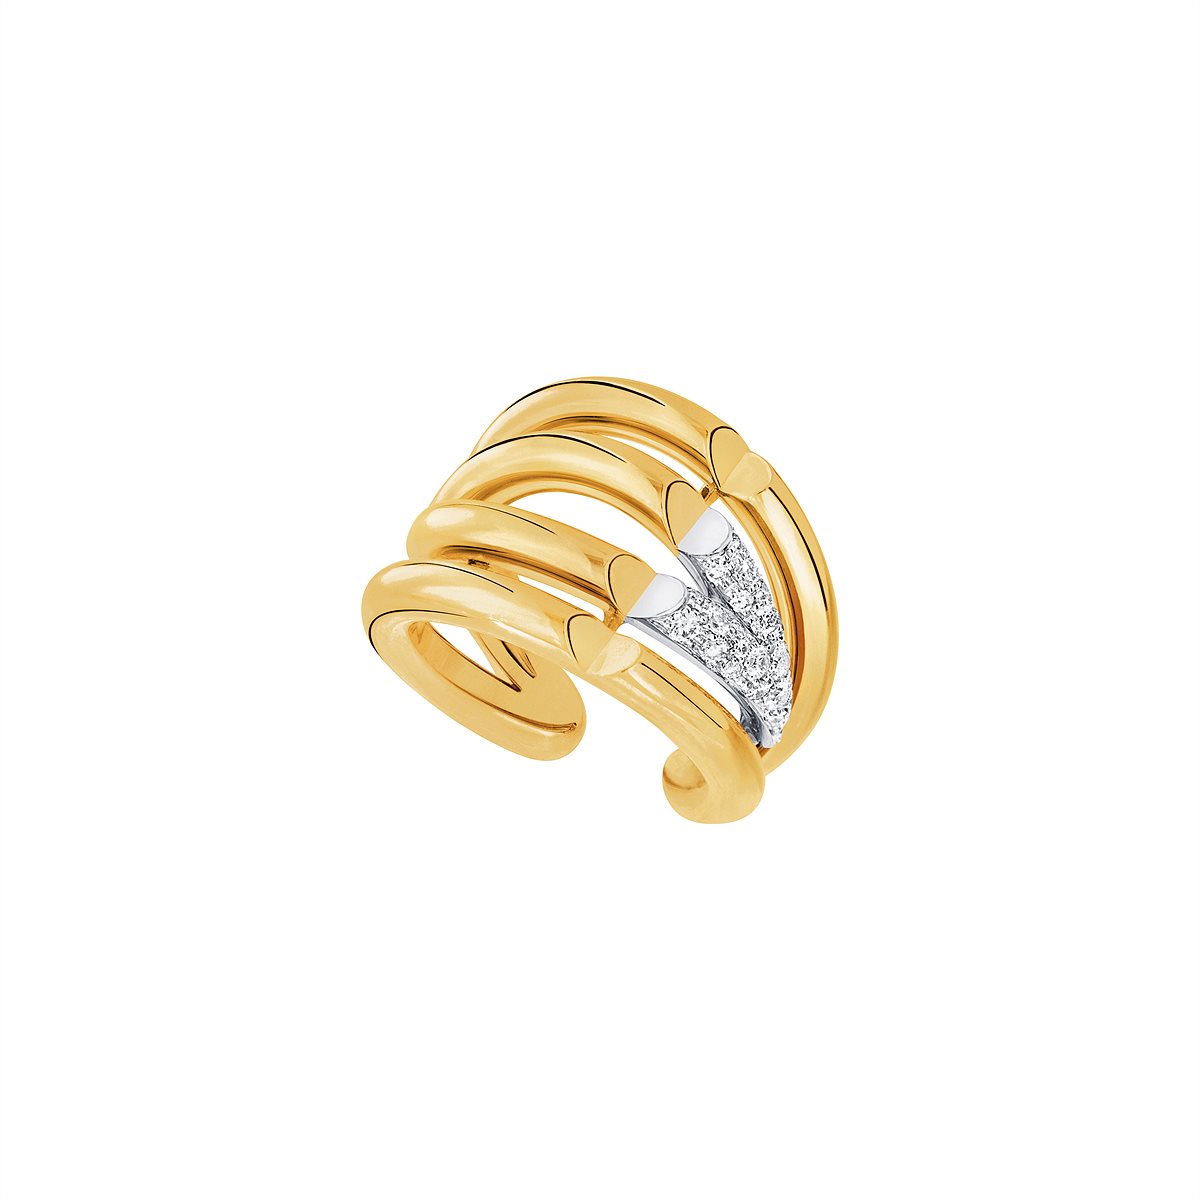 LV_Volt Ring, Yellow Gold, White Gold and Diamonds_EUR 9900,00